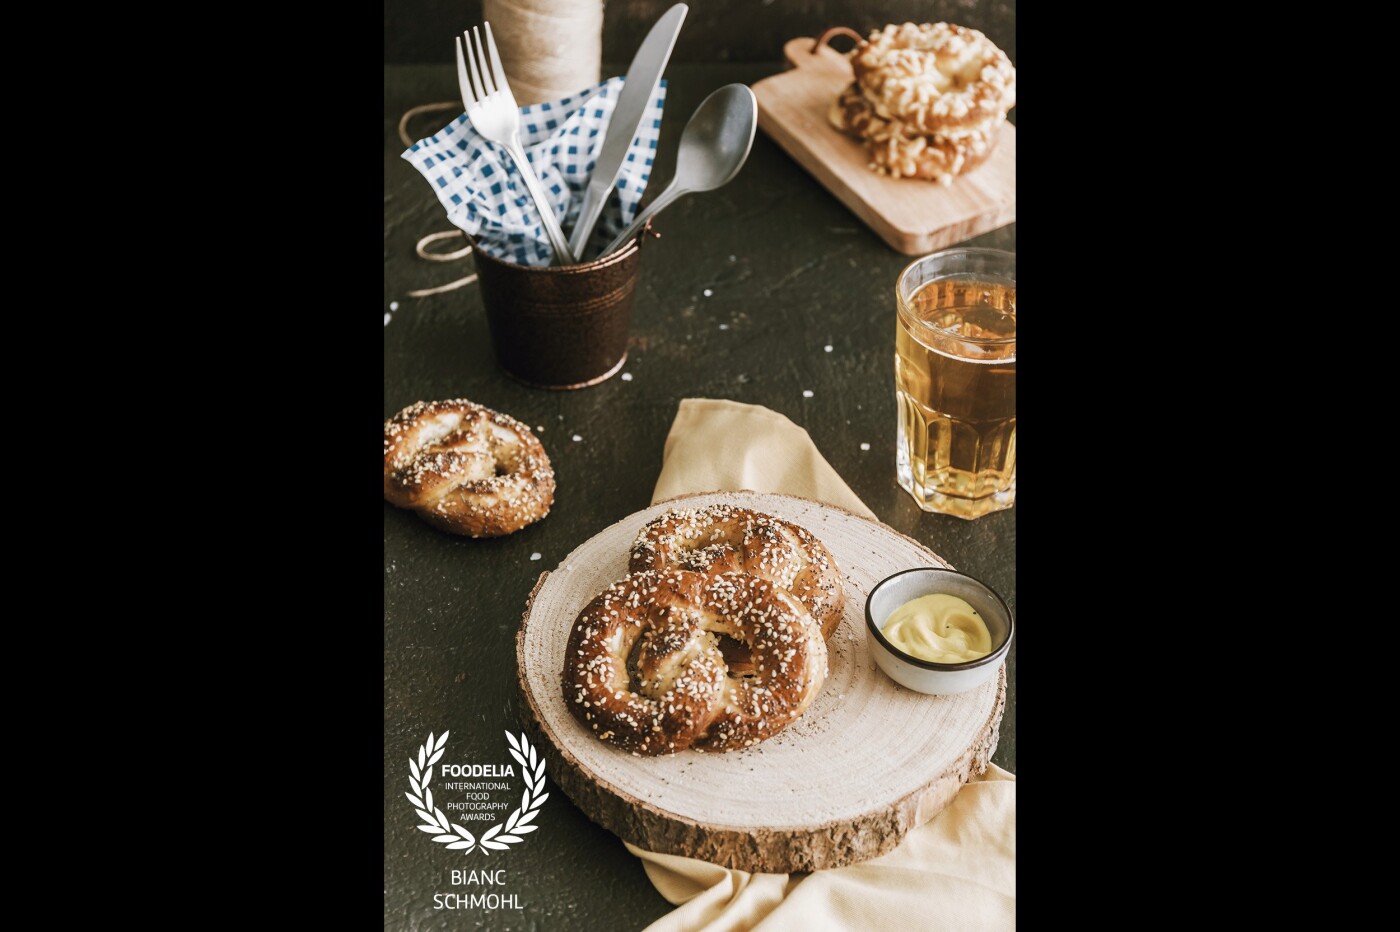 These savory pretzels are such heroes. I added some sea salt, dippers, tableware, and a glass of beer to the setting. Served the pretzels on a tree trunk, which is an all-time favorite eyecatcher!